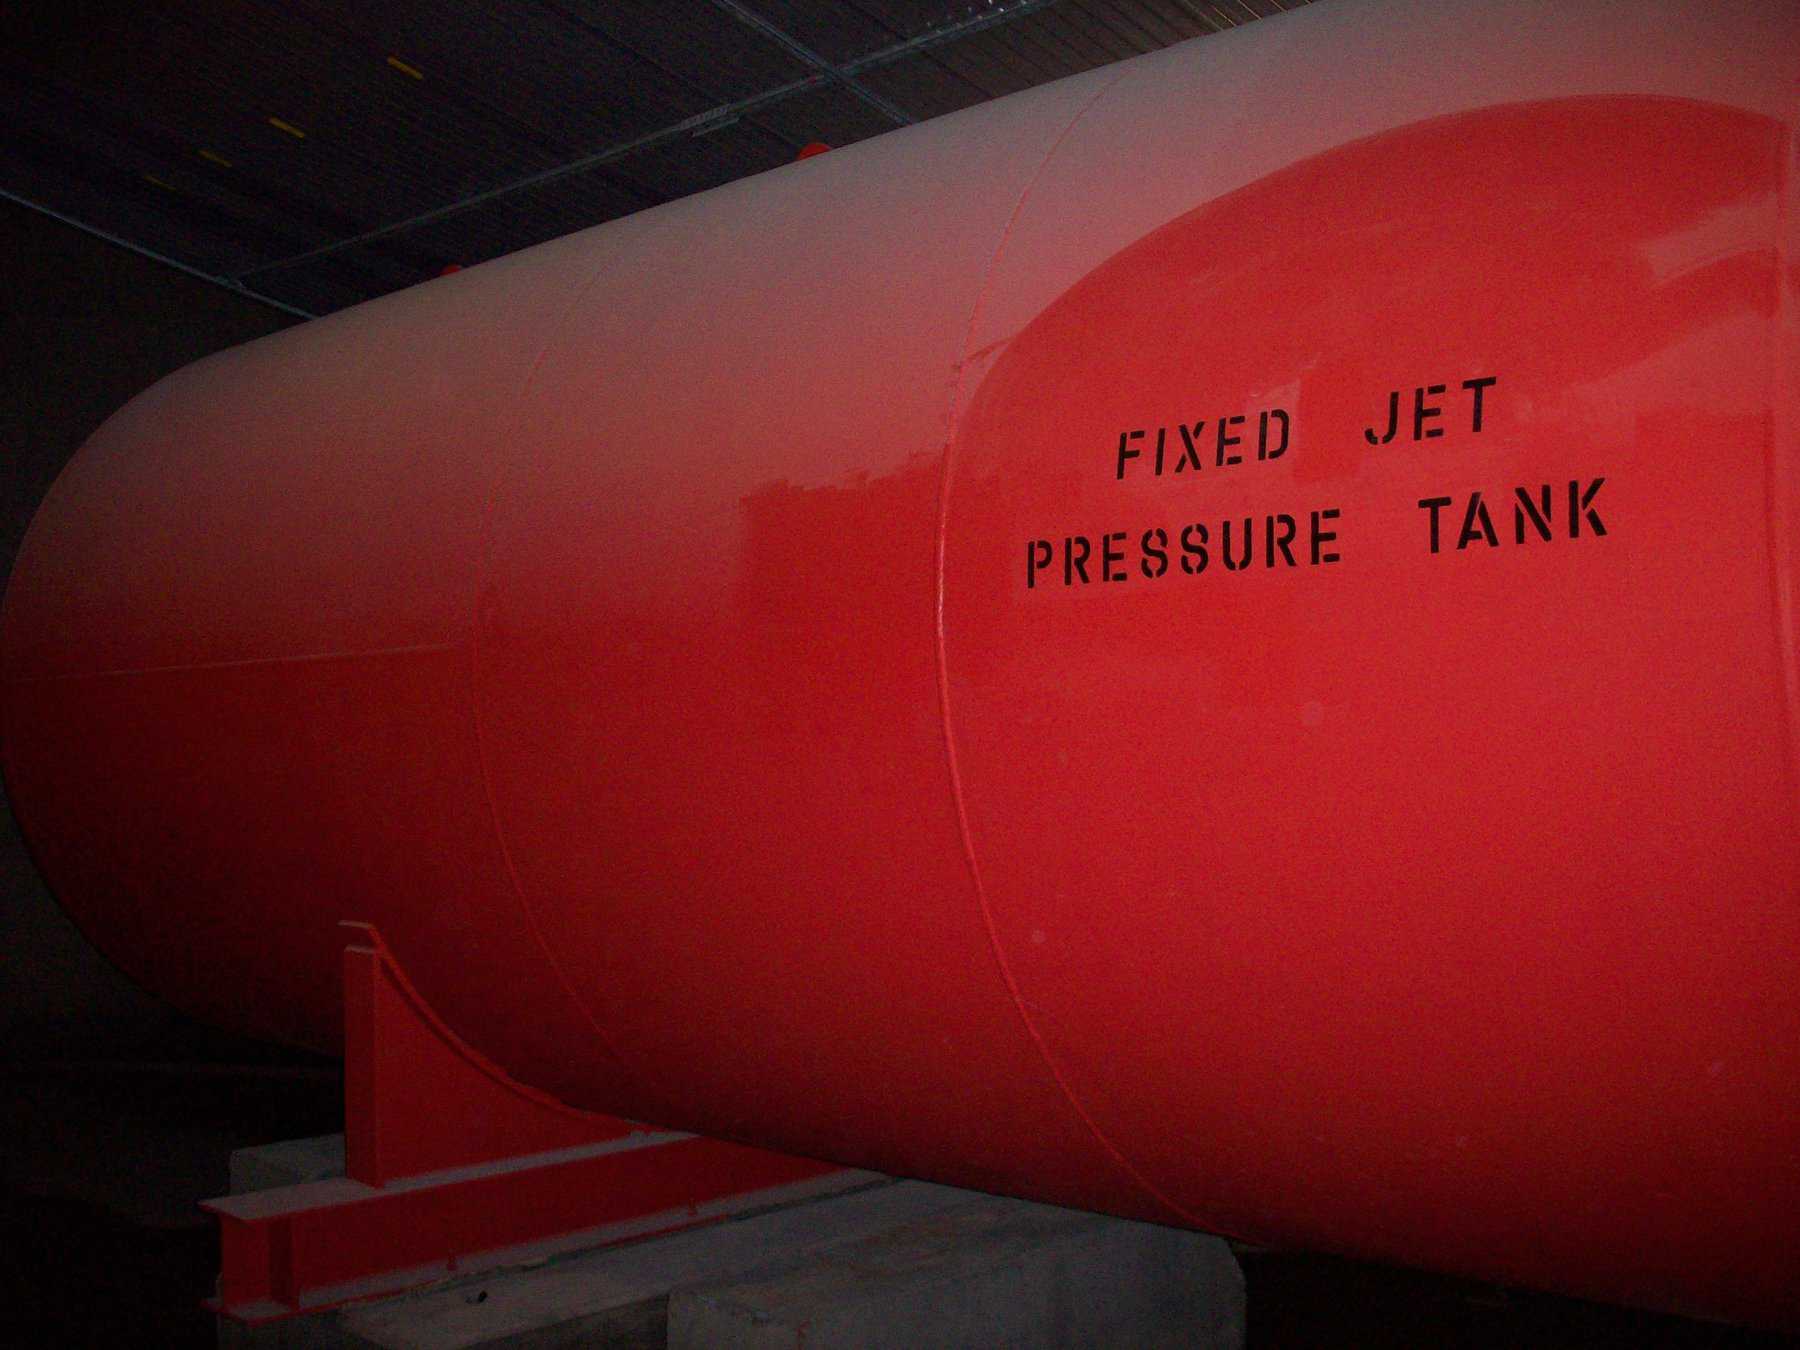 external cylinder tank painted in red with black text